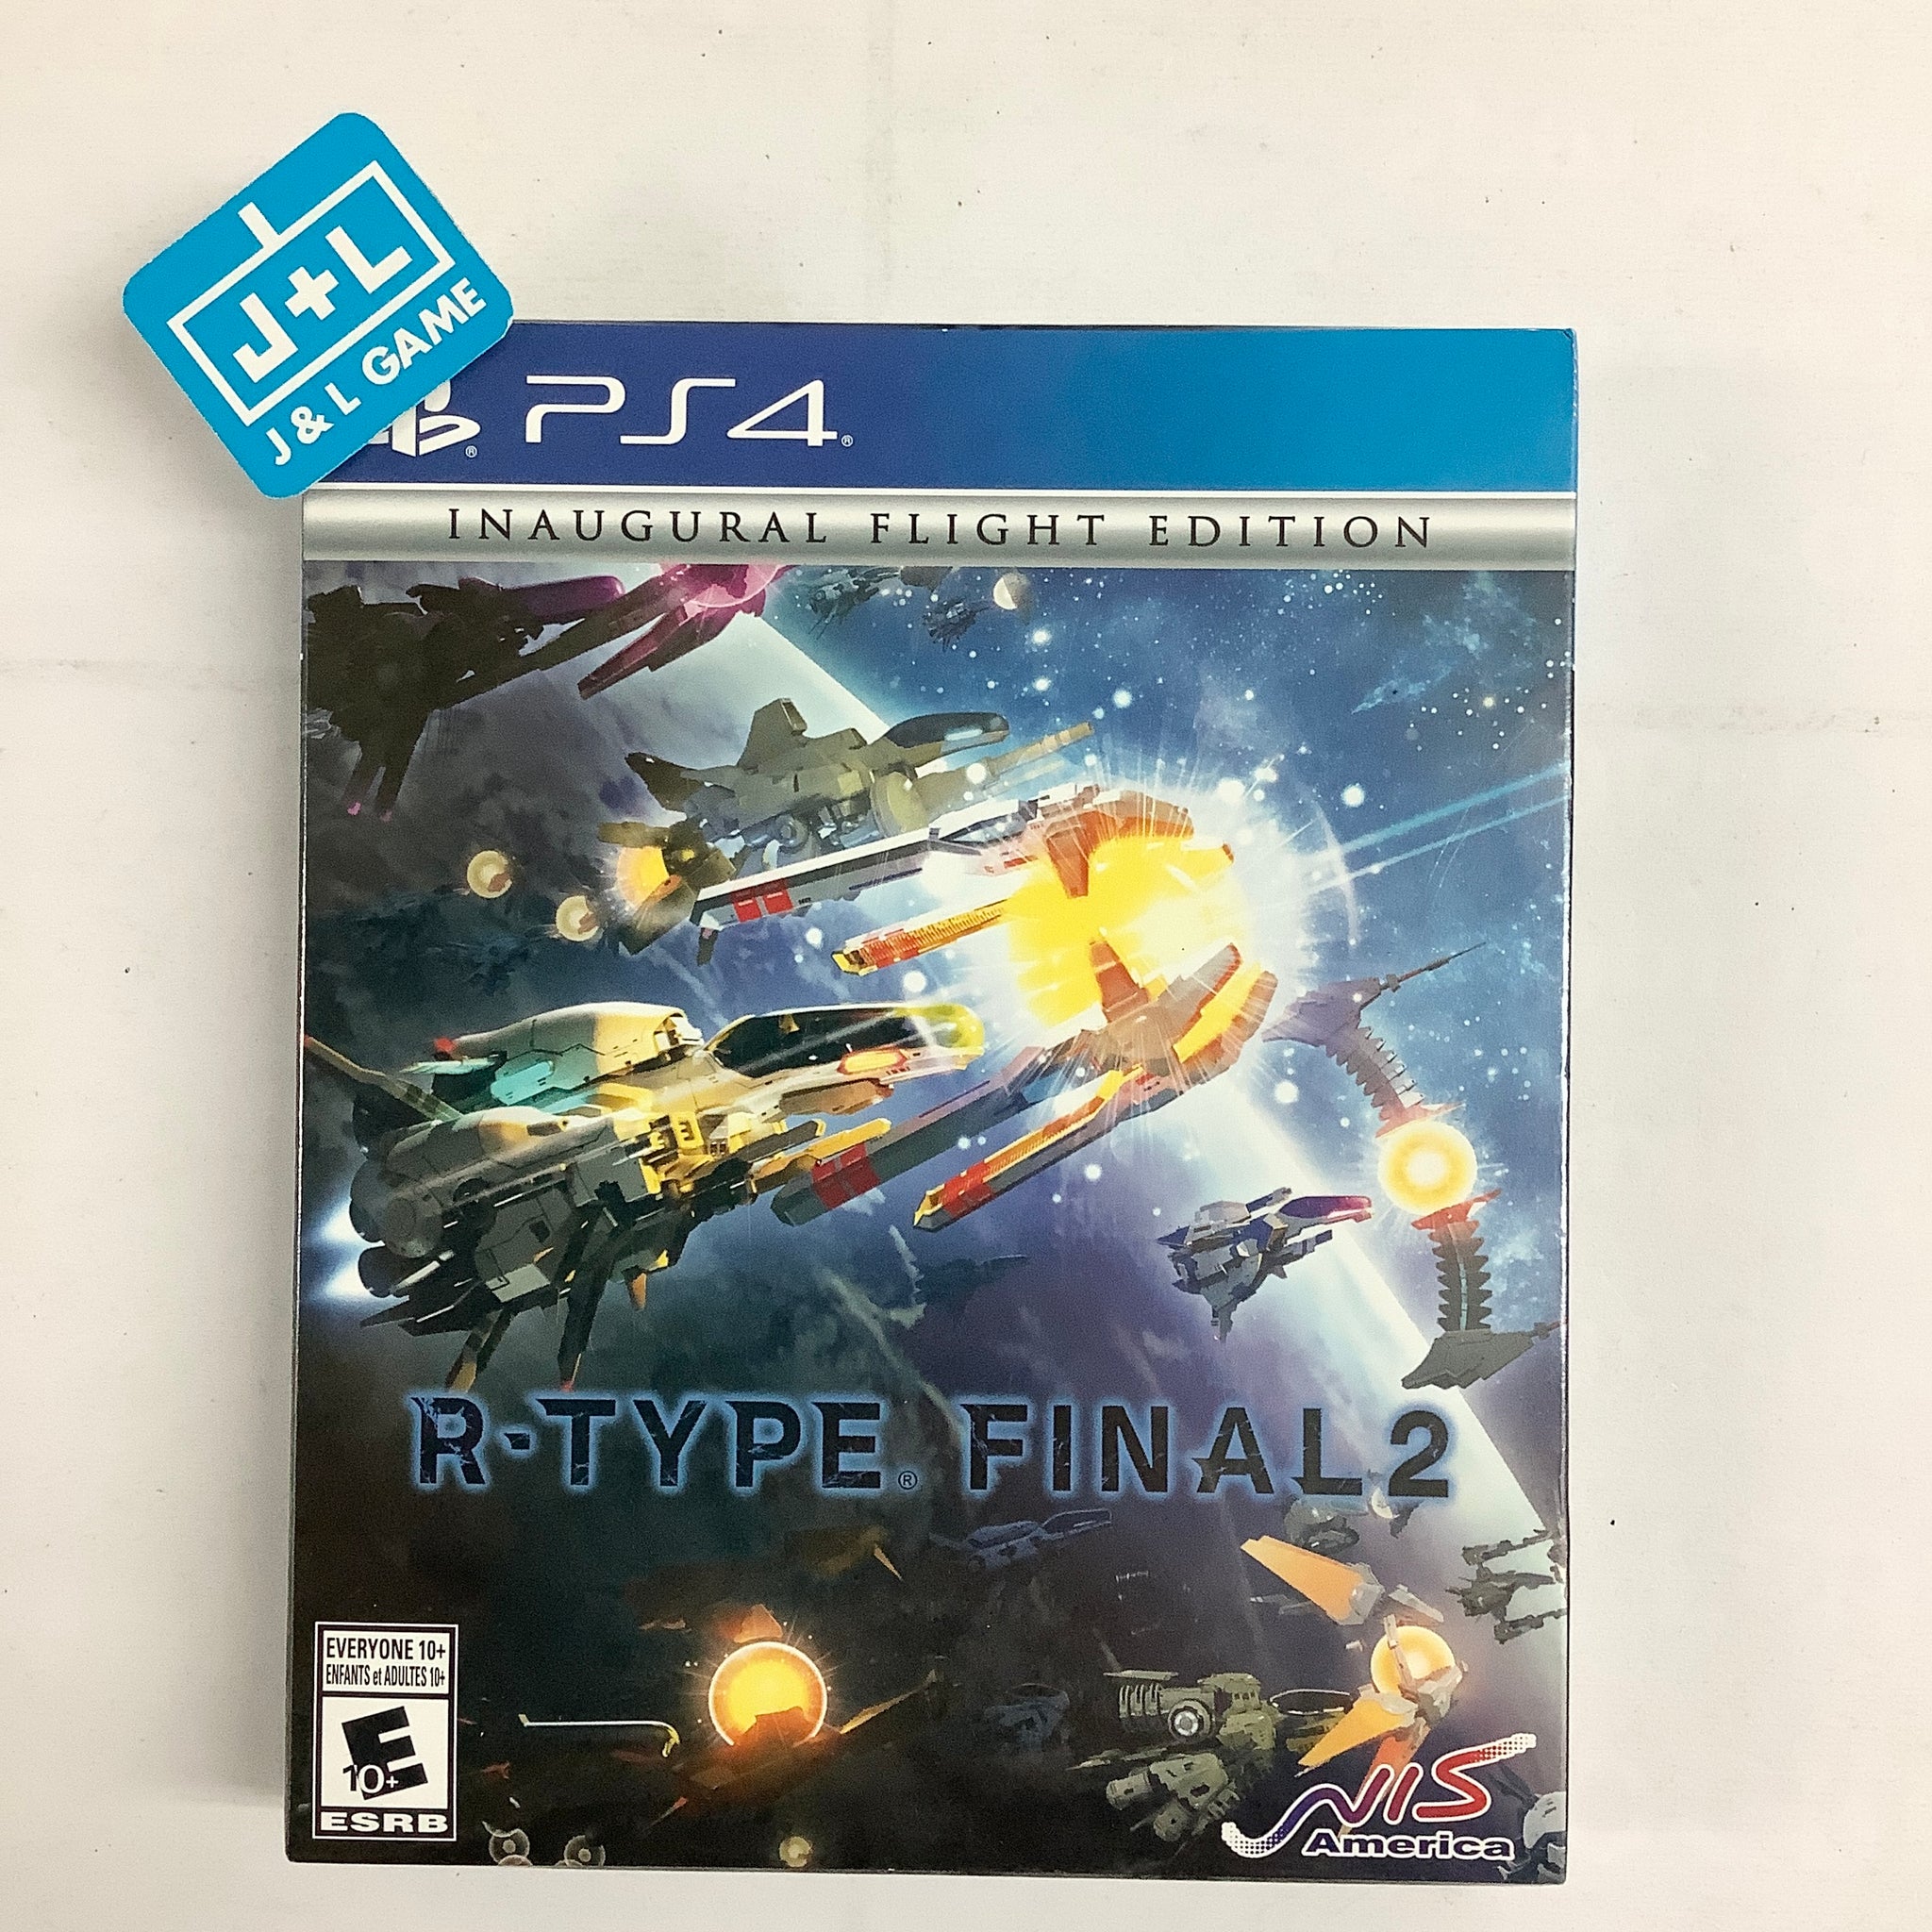 R-Type Final 2 Inaugural Flight Edition - (PS4) PlayStation 4 Video Games NIS America   